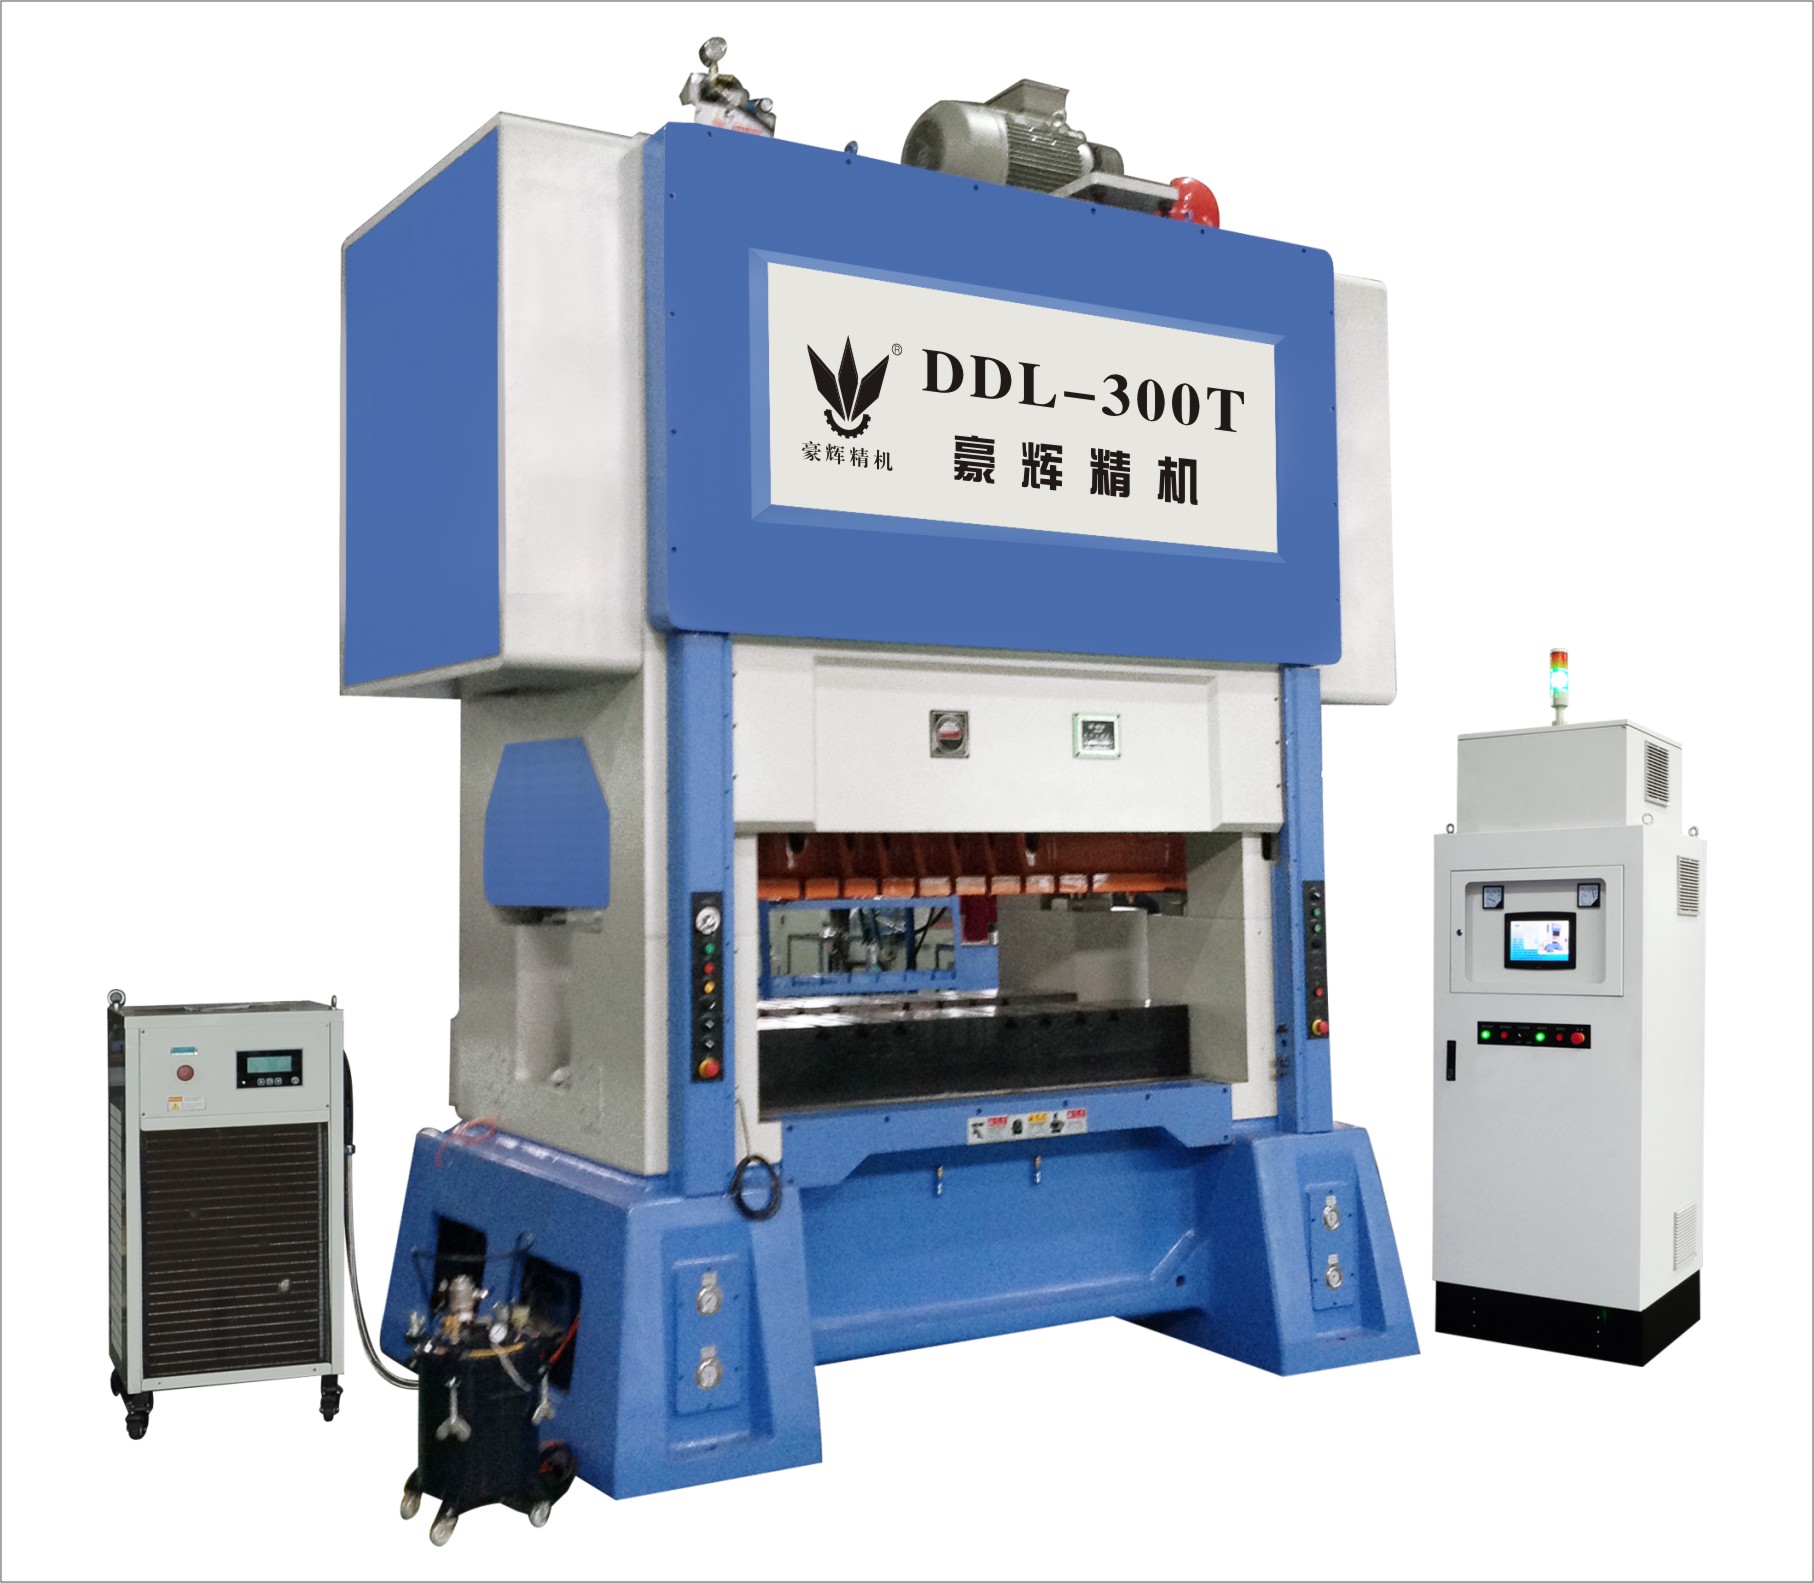 DDL-300T HIGH SPEED STAMPING LINE/ MOTOR CORE STAMPING